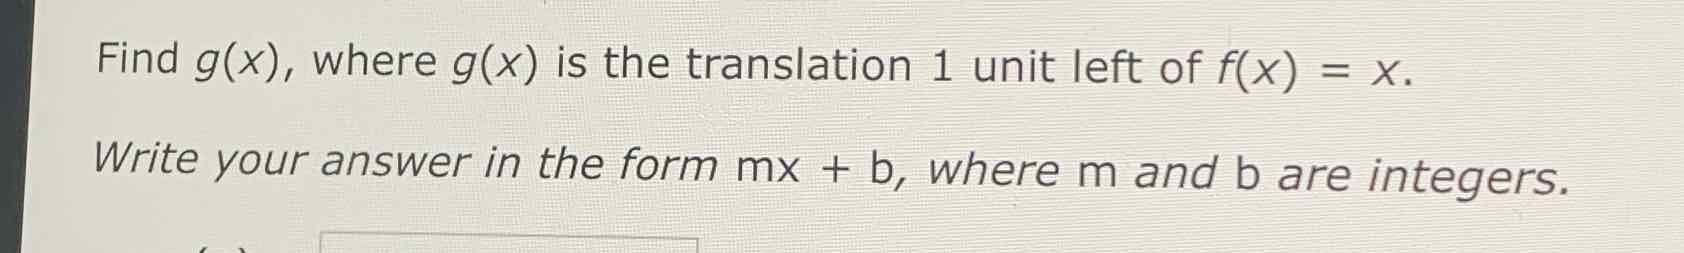 Find \( g(x) \), where \( g(x) \) is the translation 1 unit left of \( f(x)=x \).
Write your answer in the form \( \mathrm{mx}+\mathrm{b} \), where \( \mathrm{m} \) and \( \mathrm{b} \) are integers.